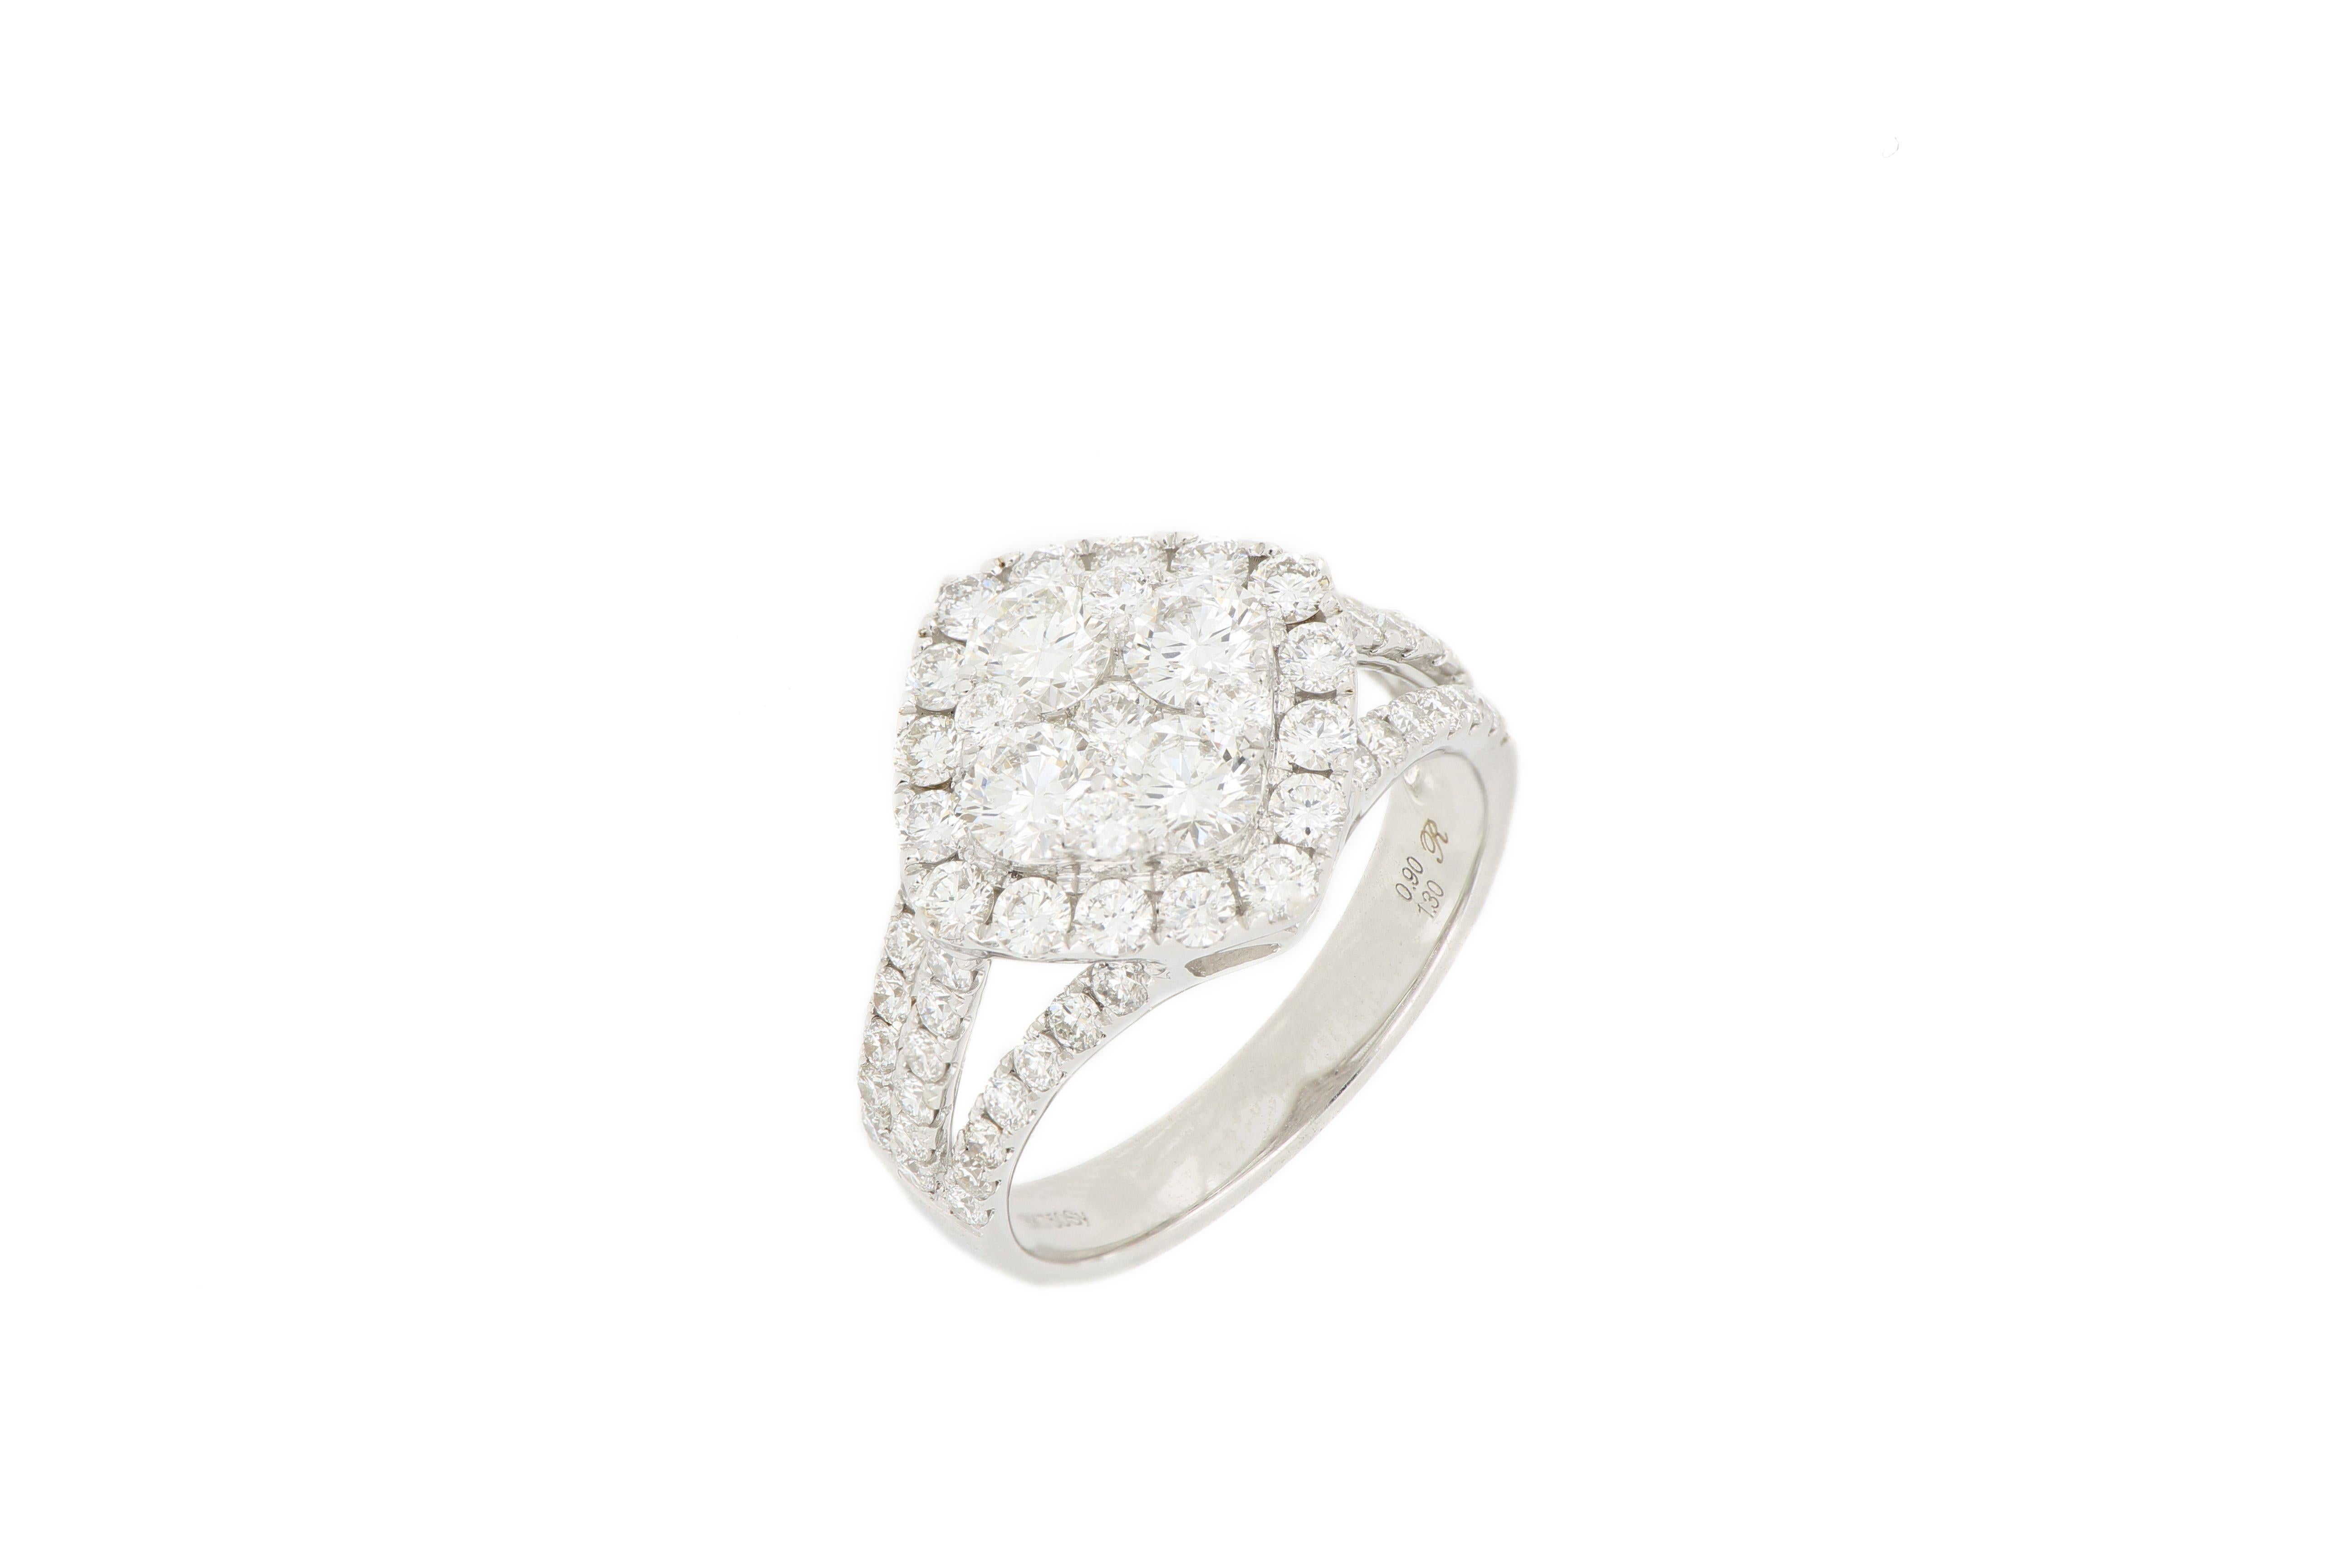 A diamond ring, composed of brilliant-cut diamonds weighing approximately 2.2 carats, mounted in 18 Karat white gold.
A beautiful ring which can be worn for any occasion.
The brand  is renowned for its high jewellery collections with fabulous